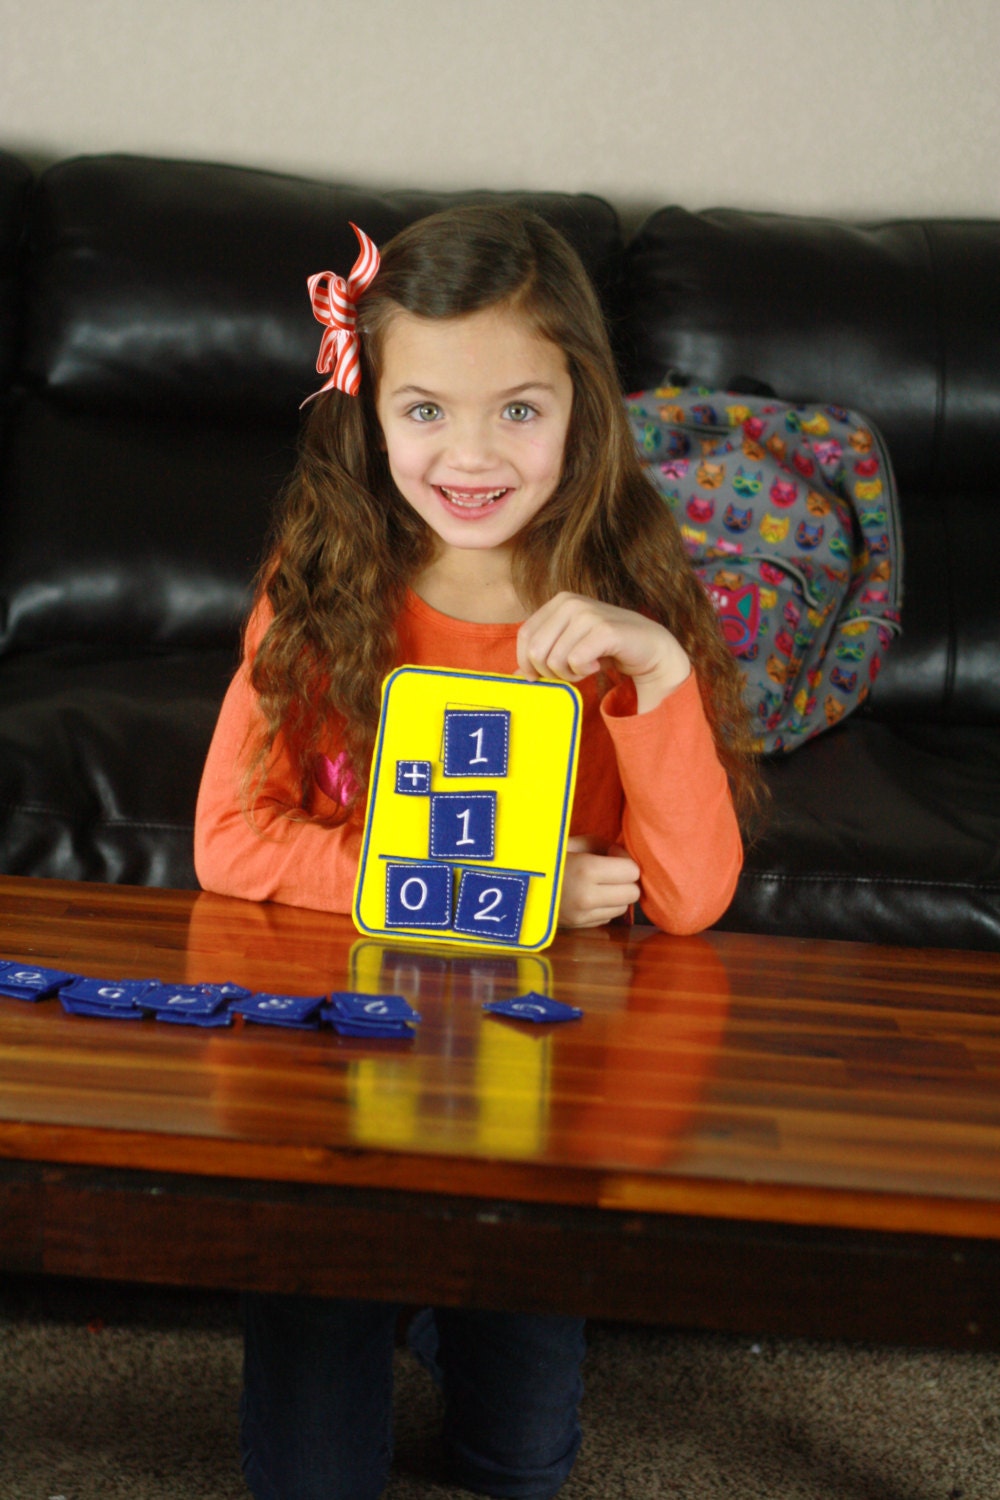 Felt math activity set for teaching addition, subtraction, multiplication, and division in the classroom or at home